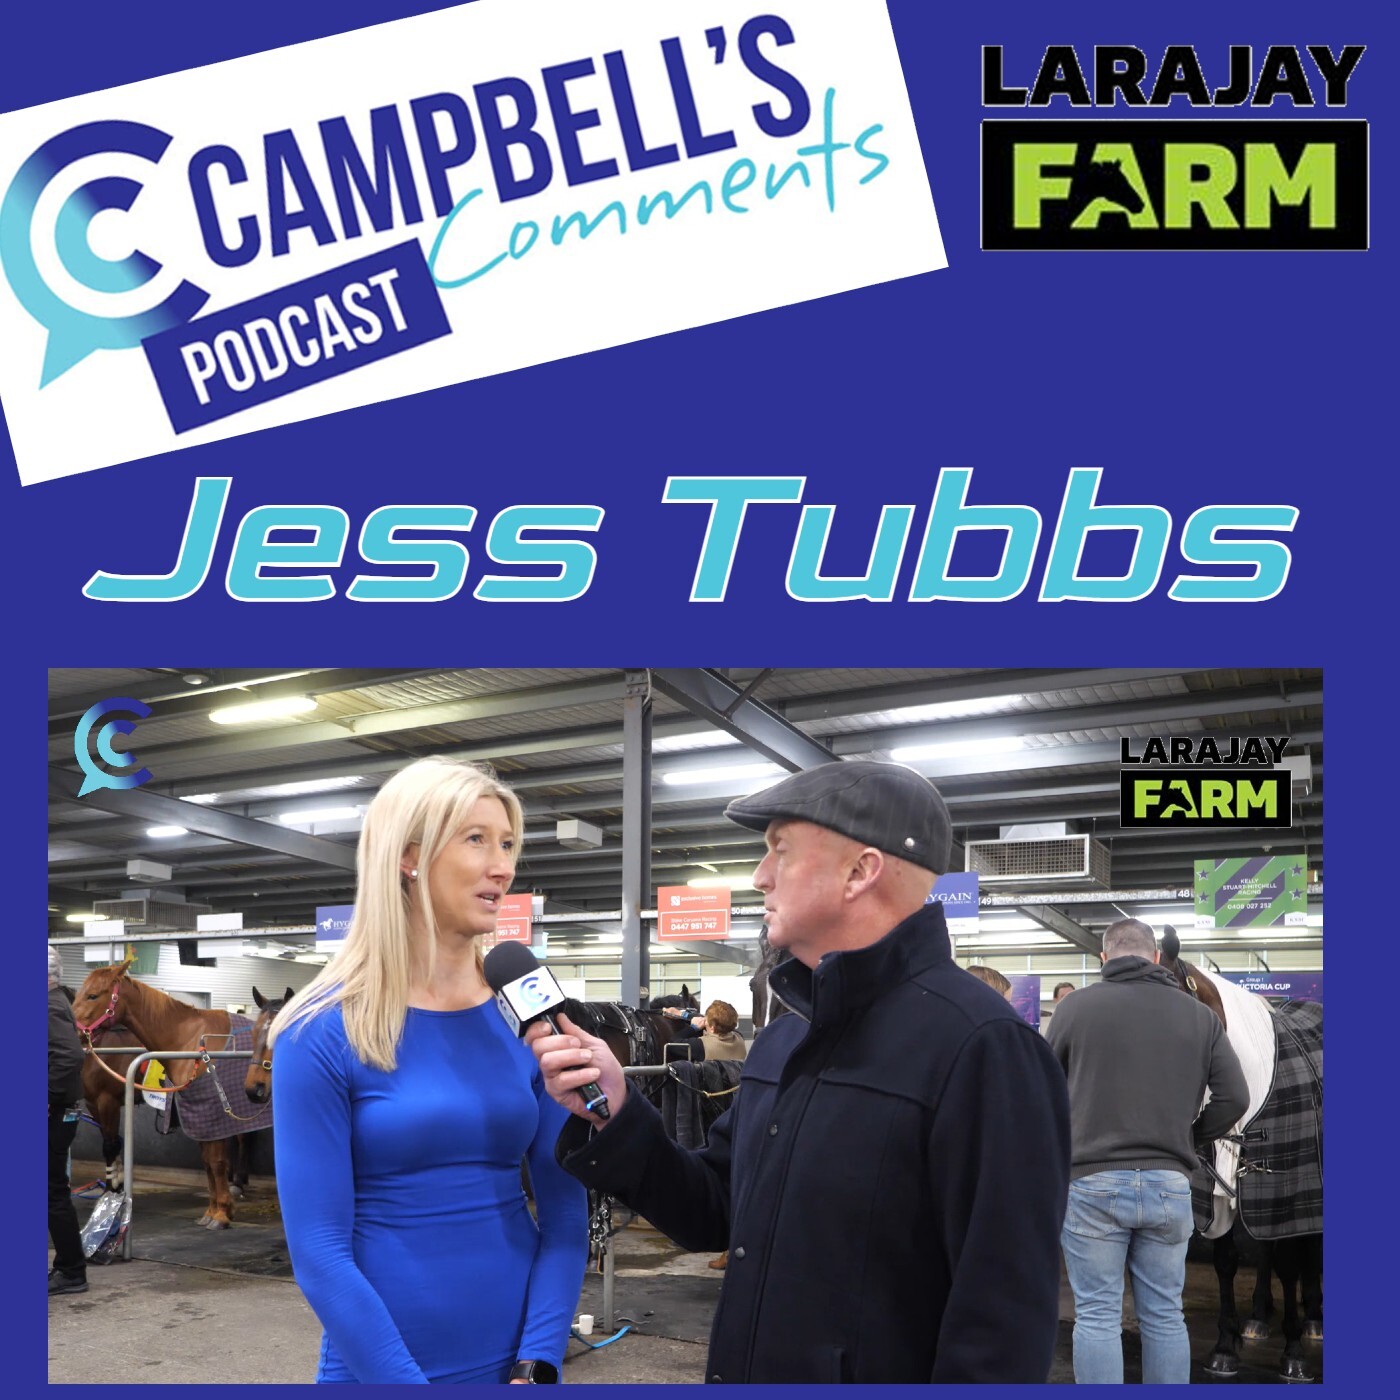 You are currently viewing 209: Campbells Comments with Jess Tubbs